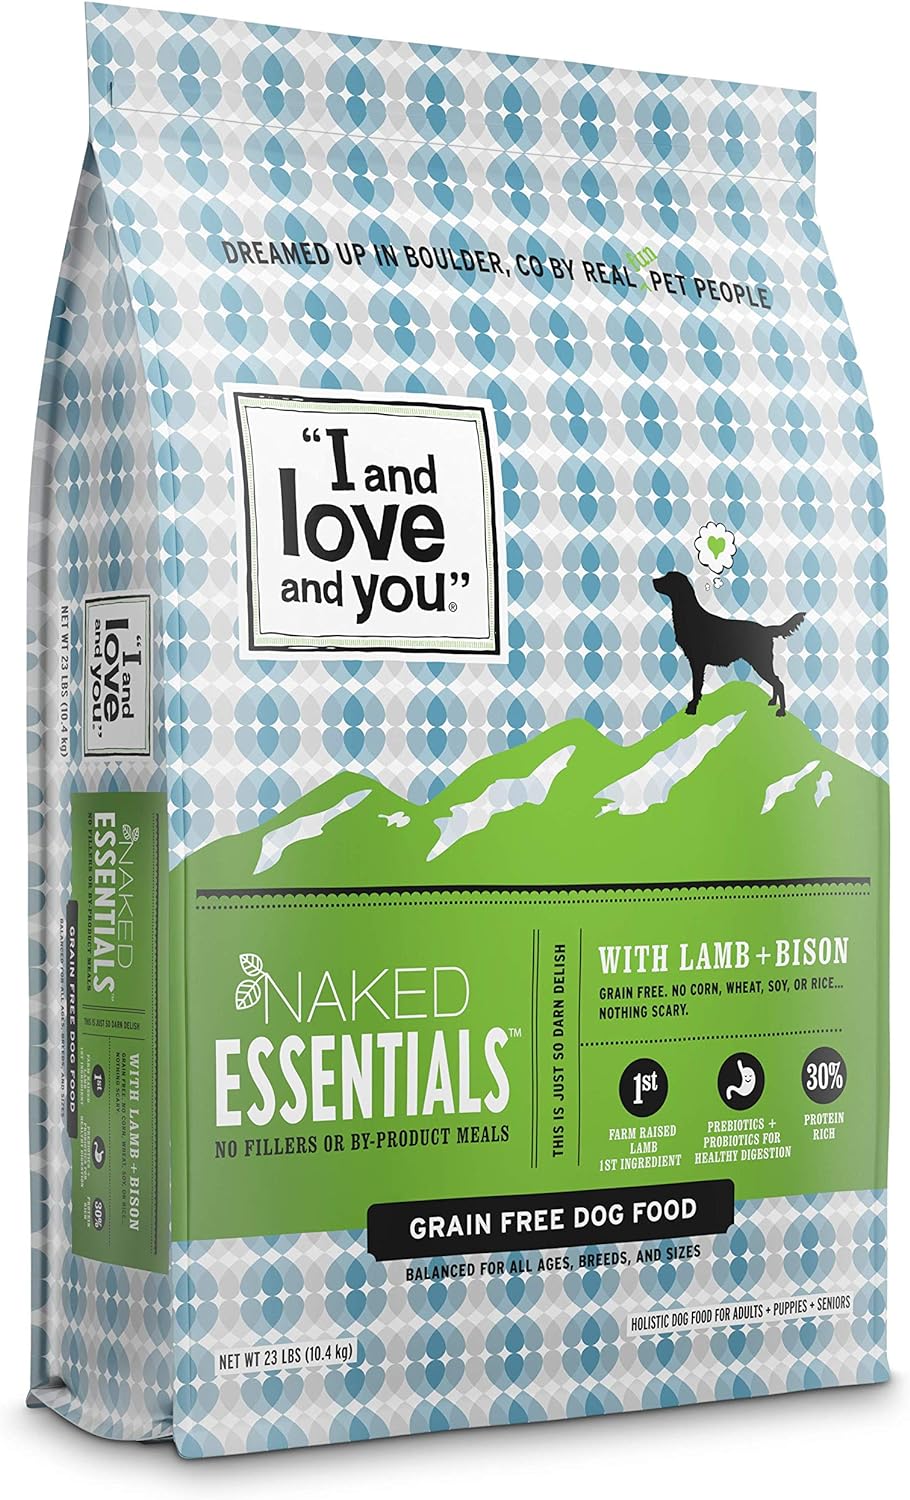 I and love and you Naked Essentials Dry Dog Food - Lamb + Bison - High Protein, Real Meat, No Fillers, Prebiotics + Probiotics, 23lb Bag